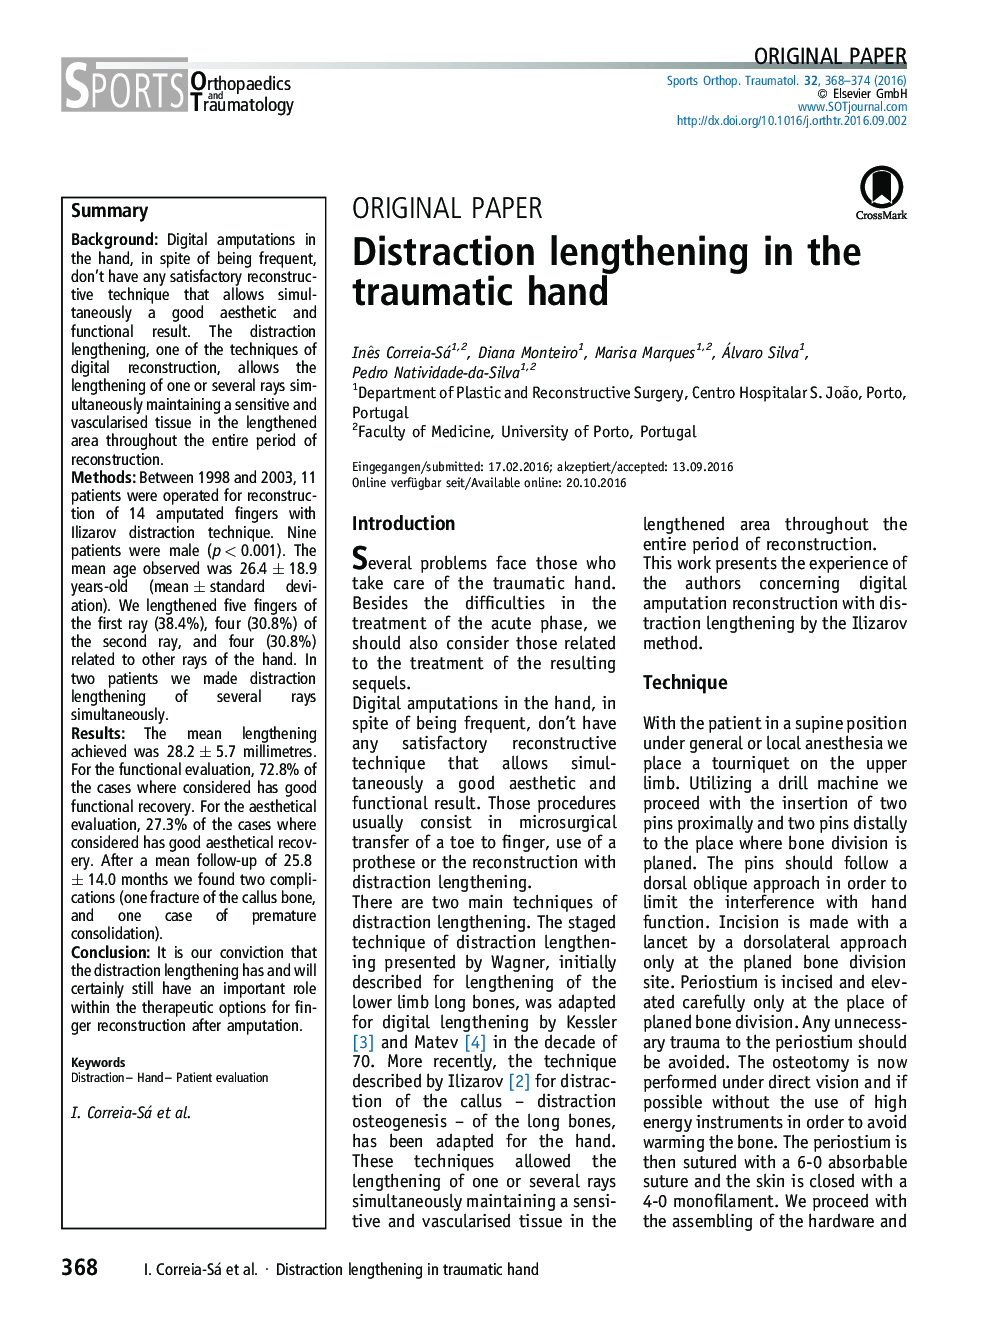 Distraction lengthening in the traumatic hand